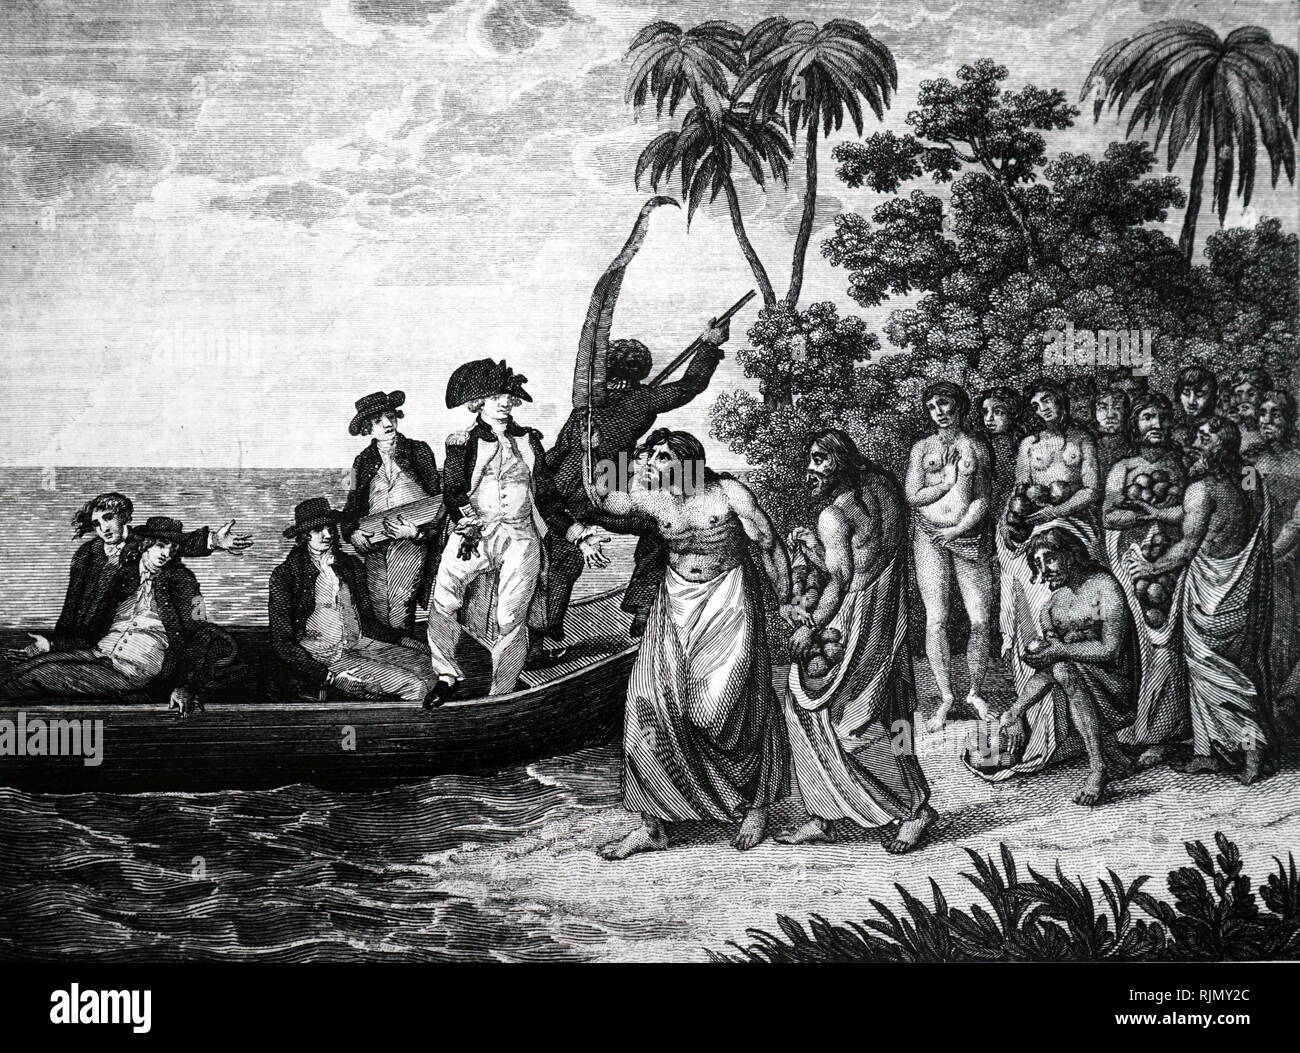 An engraving depicting Captain James Cook landing in the Friendly Islands and being brought gifts of BREADFRUIT. From Captain Cooks Original Voyages Round the World, Woodbridge, (ca 1815) Stock Photo